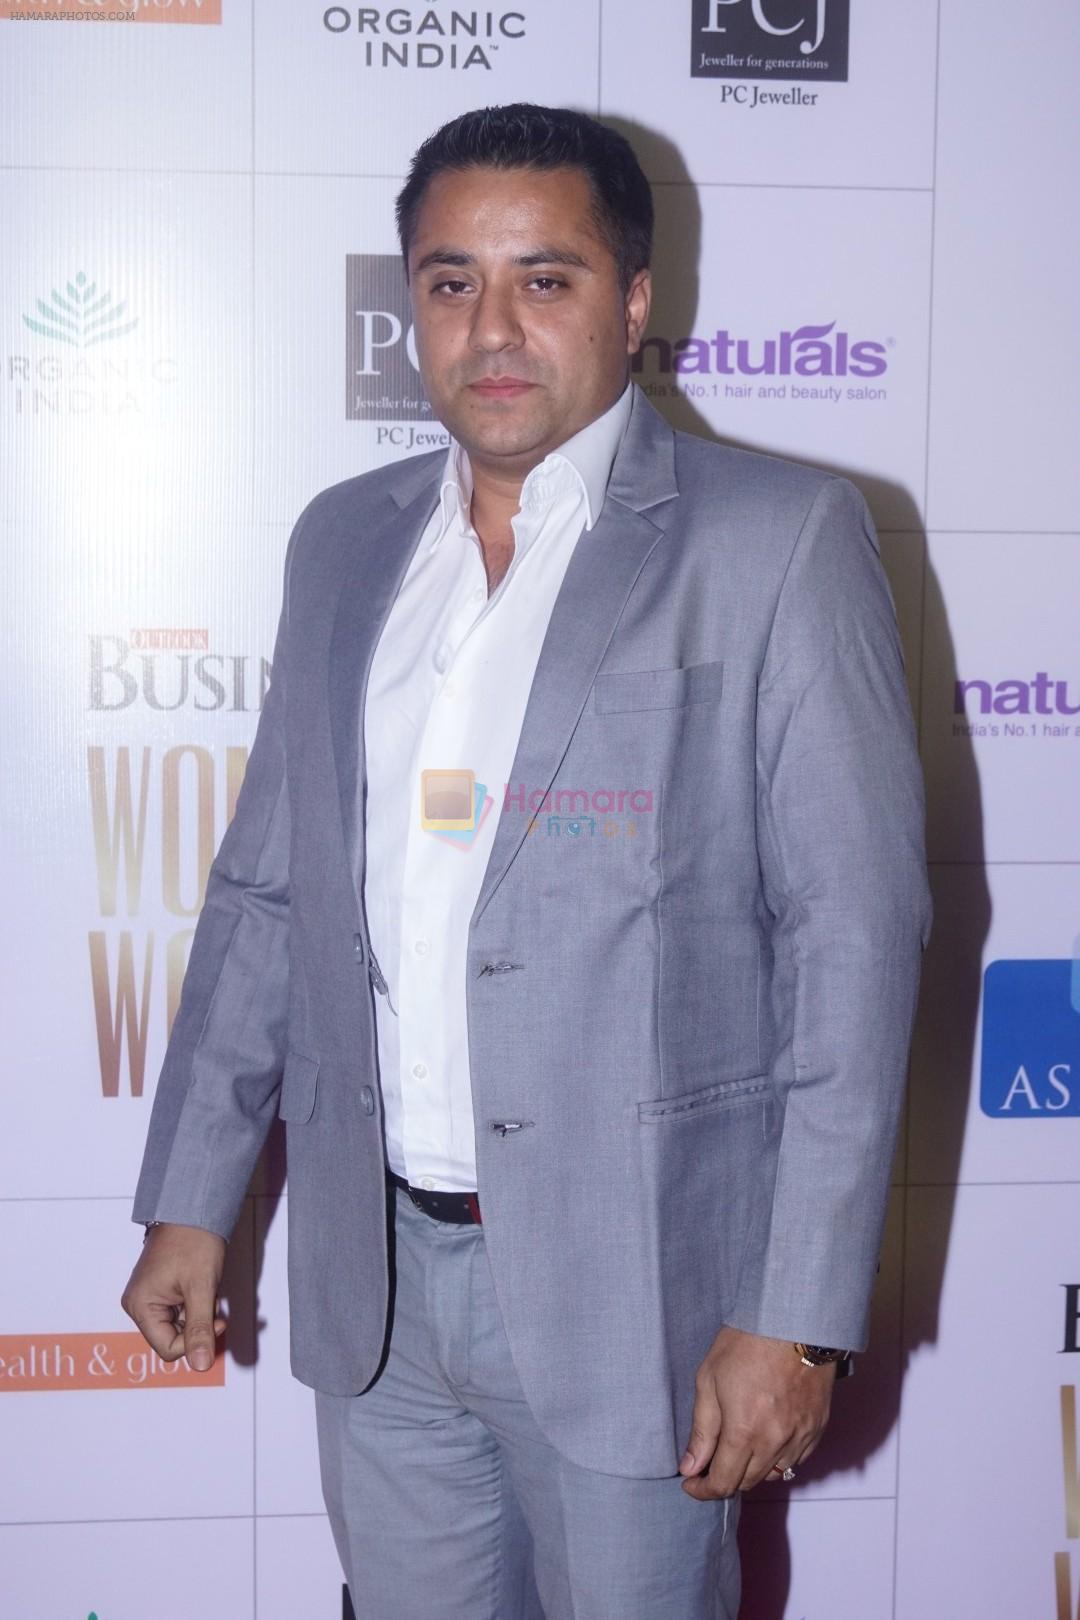 At The Outlook Business Women Of Worth Awards 2017 on 10th Nov 2017